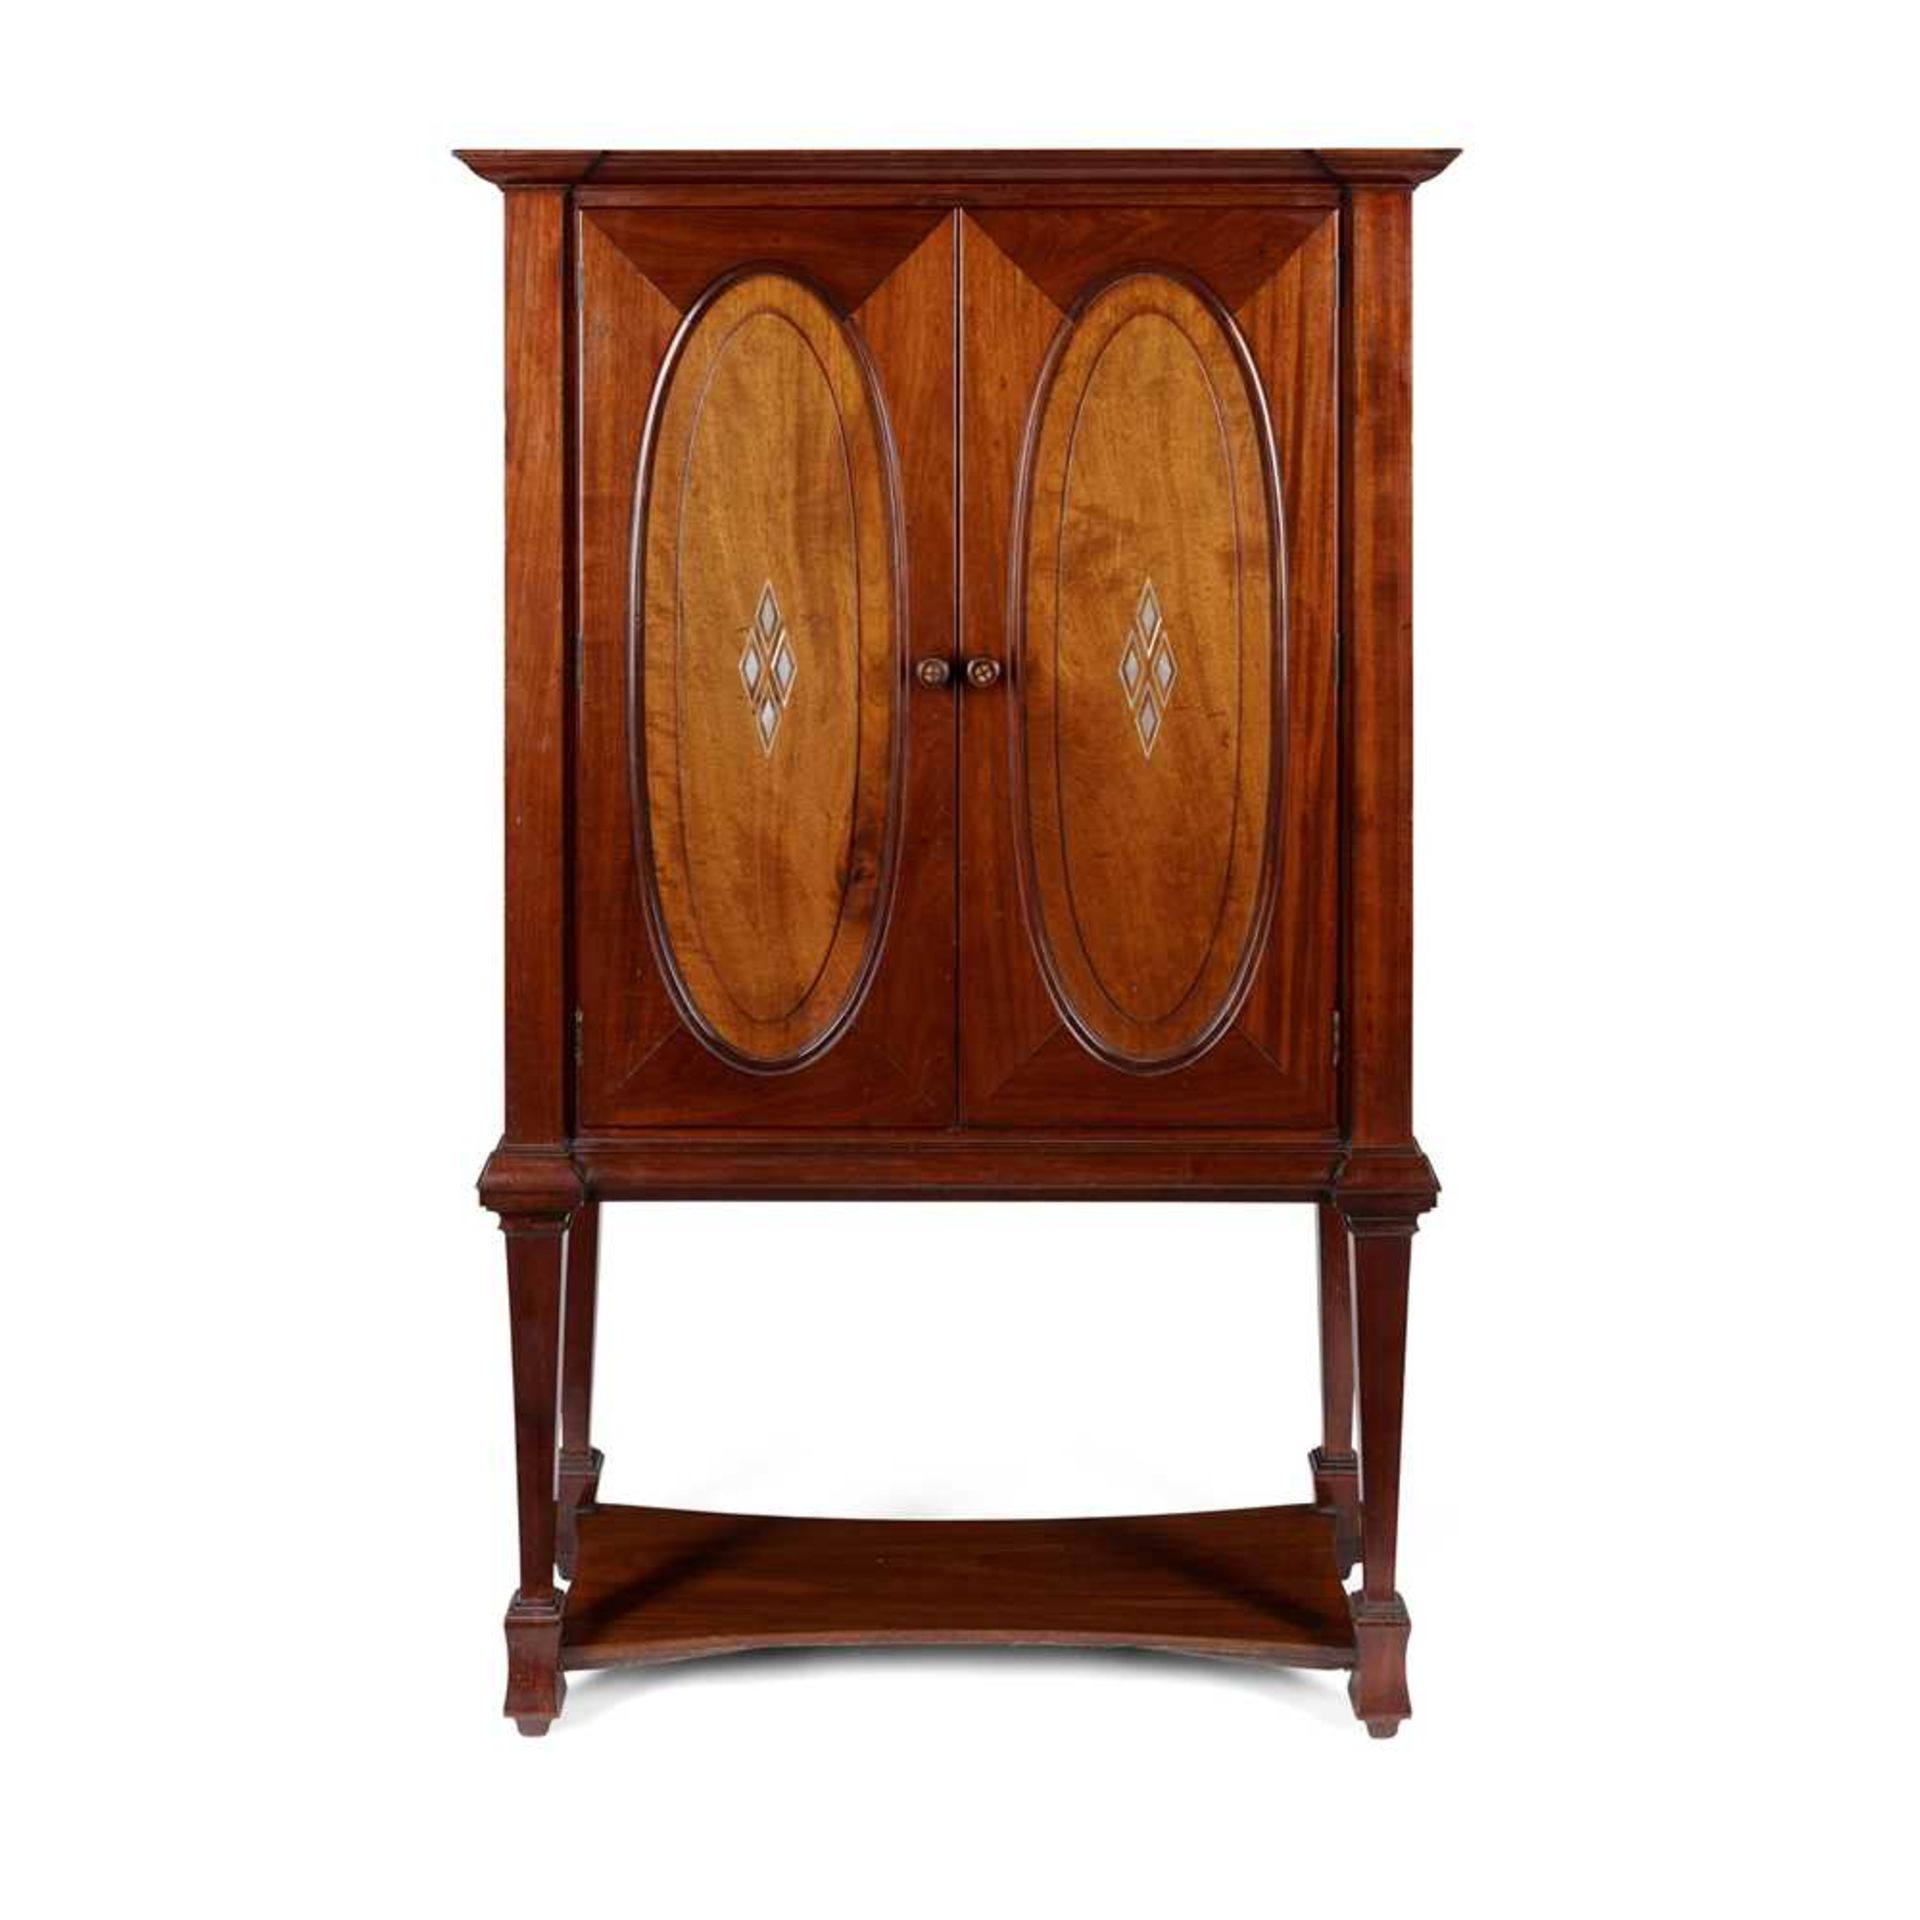 ENGLISH, MANNER OF CHARLES SPOONER DRAWING ROOM CABINET, CIRCA 1910